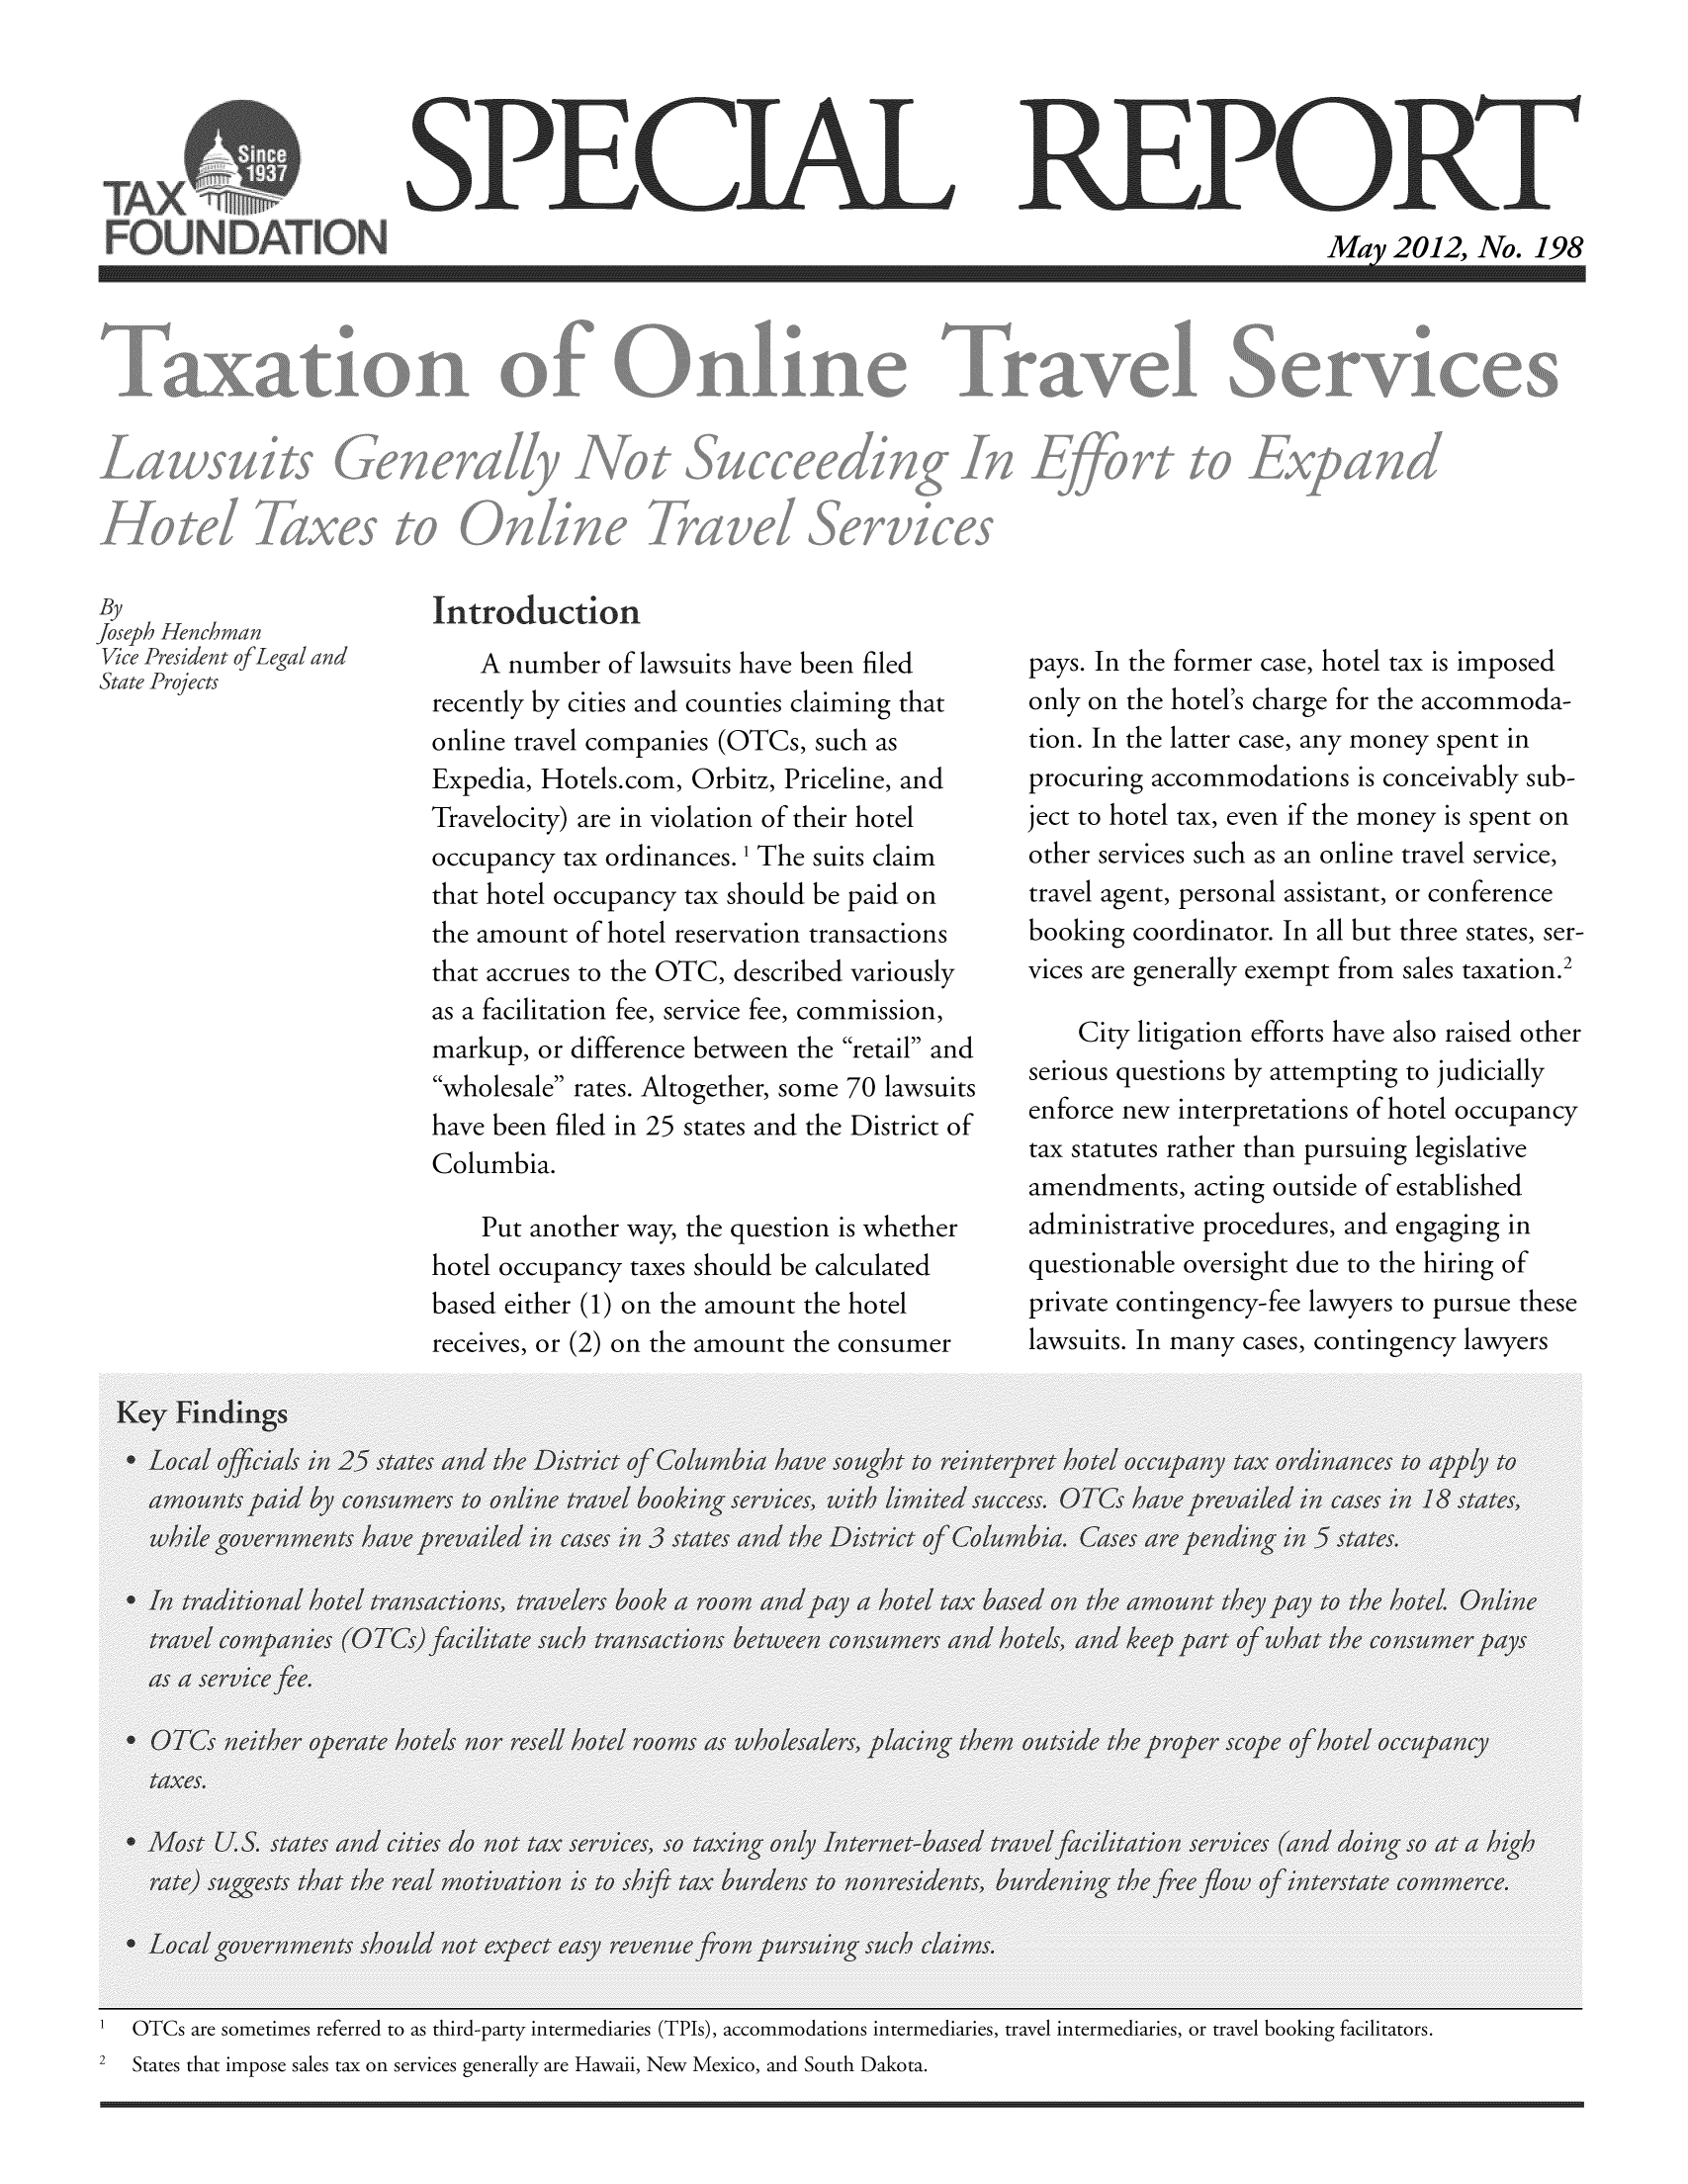 handle is hein.taxfoundation/srbjixz0001 and id is 1 raw text is: May 2012., No. 198

A number of lawsuits have been filed
recently by cities and counties claiming that
online travel companies (OTCs, such as
Expedia, Hotels.com, Orbitz, Priceline, and
Travelocity) are in violation of their hotel
occupancy tax ordinances. 1 The suits claim
that hotel occupancy tax should be paid on
the amount of hotel reservation transactions
that accrues to the OTC, described variously
as a facilitation fee, service fee, commission,
markup, or difference between the retail and
wholesale rates. Altogether, some 70 lawsuits
have been filed in 25 states and the District of
Columbia.
Put another way, the question is whether
hotel occupancy taxes should be calculated
based either (1) on the amount the hotel
receives, or (2) on the amount the consumer

pays. In the former case, hotel tax is imposed
only on the hotel's charge for the accommoda-
tion. In the latter case, any money spent in
procuring accommodations is conceivably sub-
ject to hotel tax, even if the money is spent on
other services such as an online travel service,
travel agent, personal assistant, or conference
booking coordinator. In all but three states, ser-
vices are generally exempt from sales taxation.2
City litigation efforts have also raised other
serious questions by attempting to judicially
enforce new interpretations of hotel occupancy
tax statutes rather than pursuing legislative
amendments, acting outside of established
administrative procedures, and engaging in
questionable oversight due to the hiring of
private contingency-fee lawyers to pursue these
lawsuits. In many cases, contingency lawyers

1   OTCs are sometimes referred to as third-party intermediaries (TPIs), accommodations intermediaries, travel intermediaries, or travel booking facilitators.
2   States that impose sales tax on services generally are Hawaii, New Mexico, and South Dakota.


